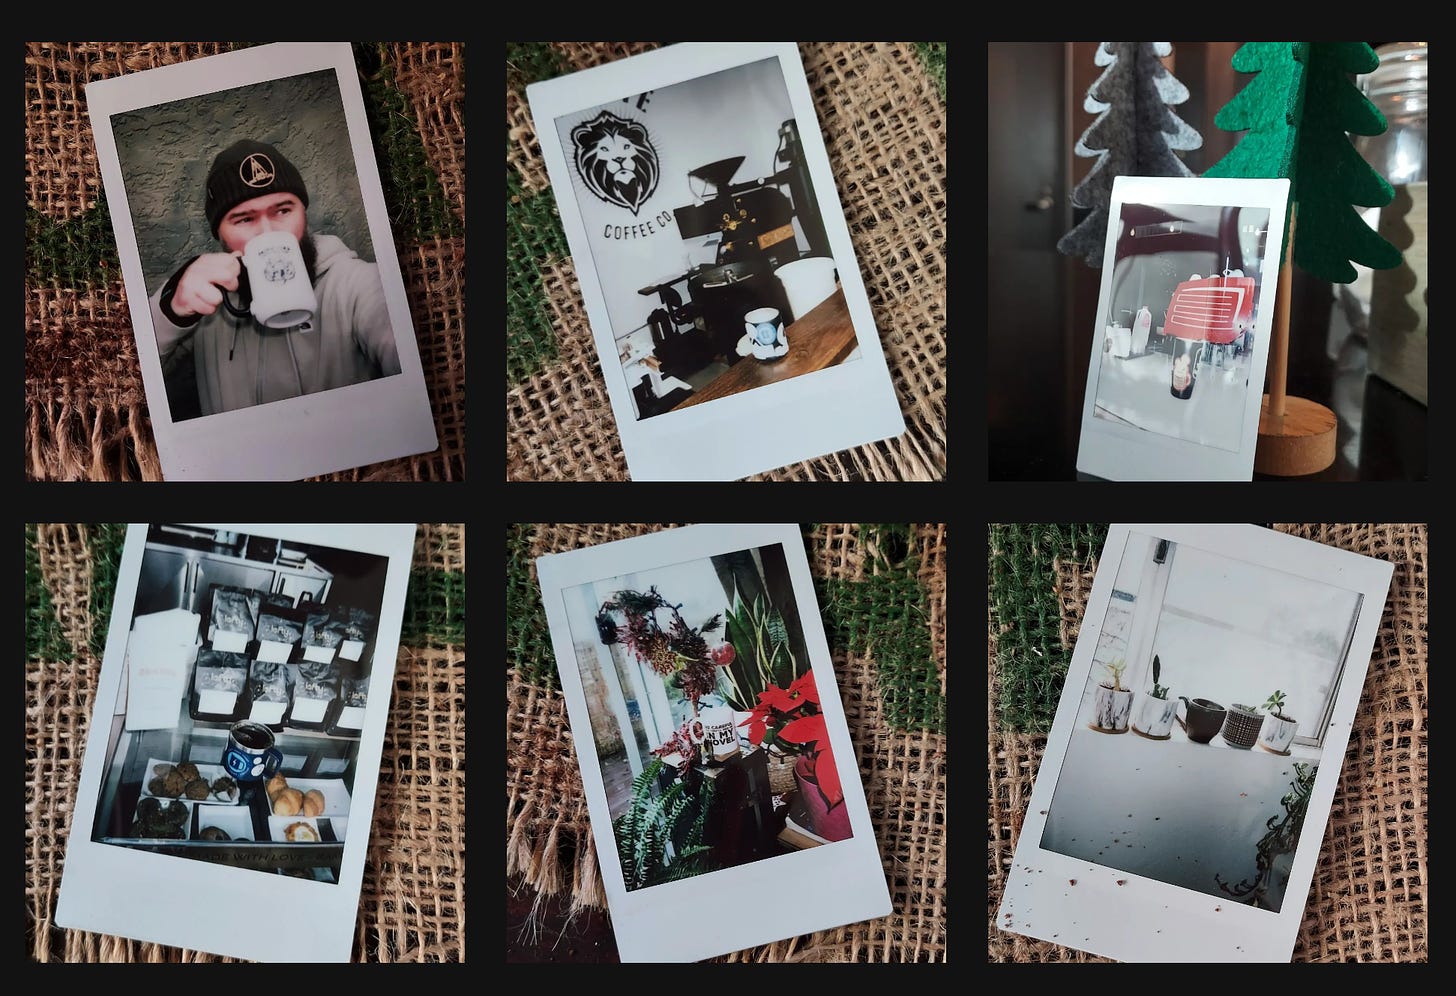 A gridded collage of photos displaying instant photos of coffee mugs and coffee drinking.